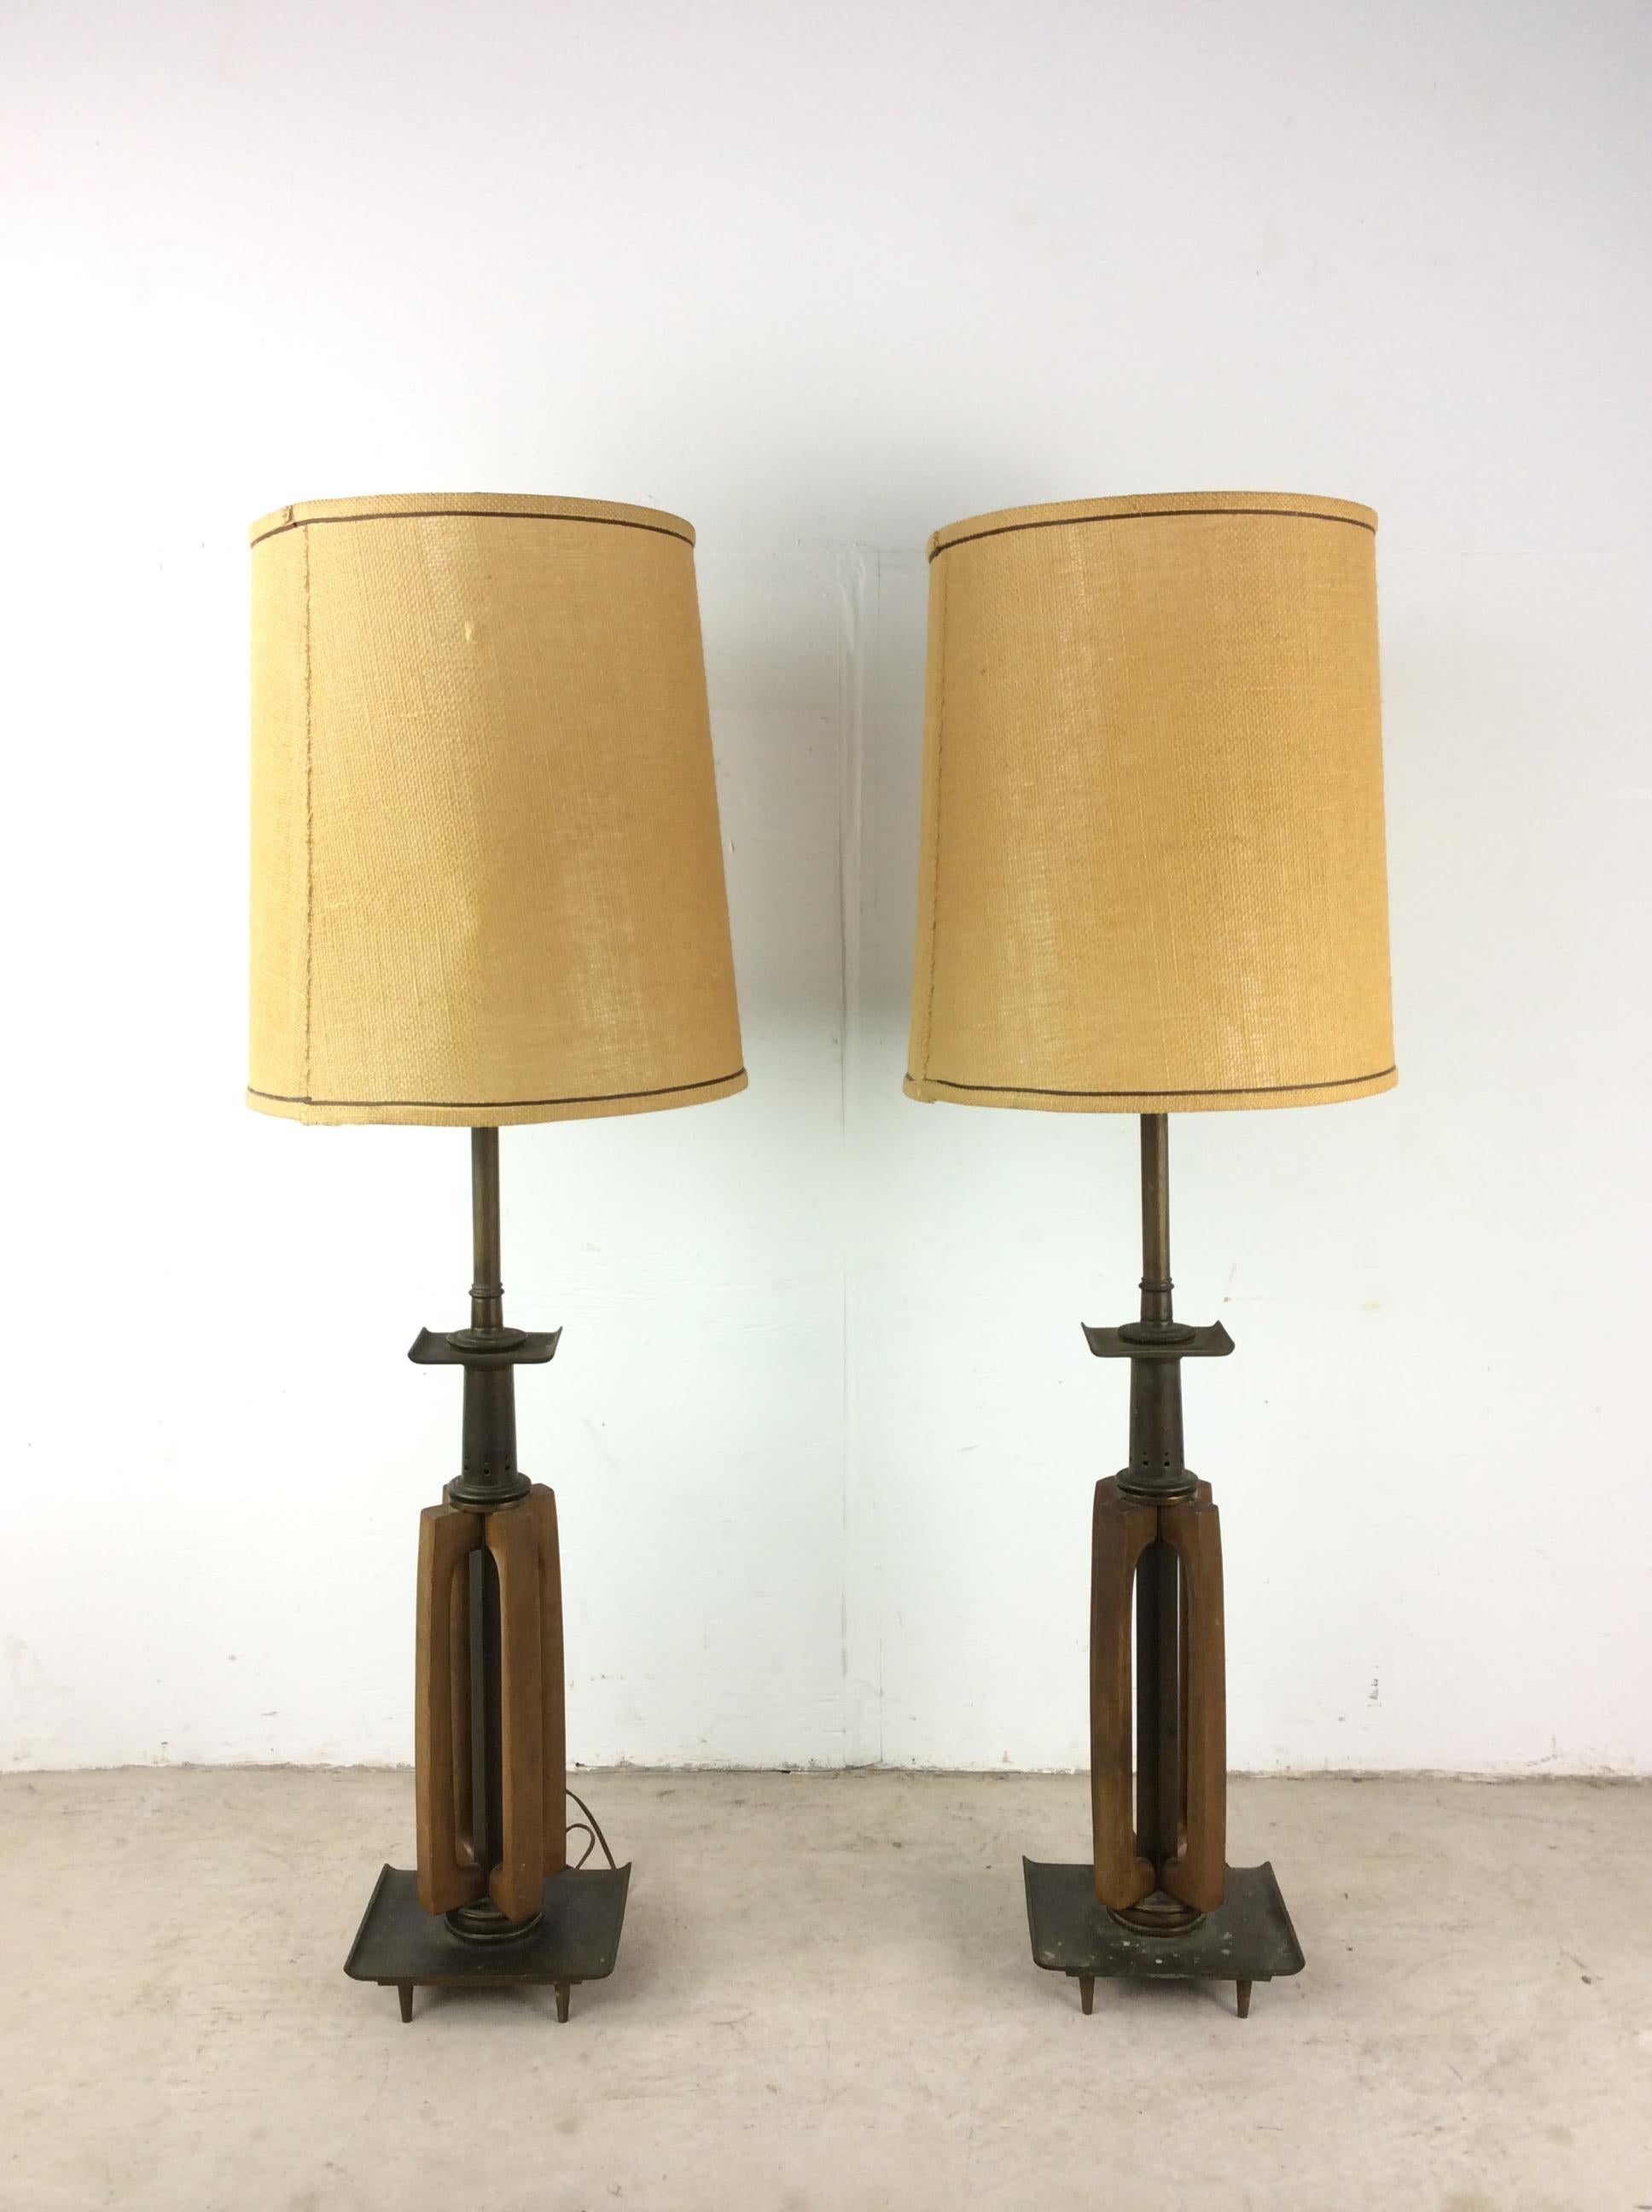 20th Century Pair of Tall Mid Century Modern Brass & Walnut Table Lamps For Sale